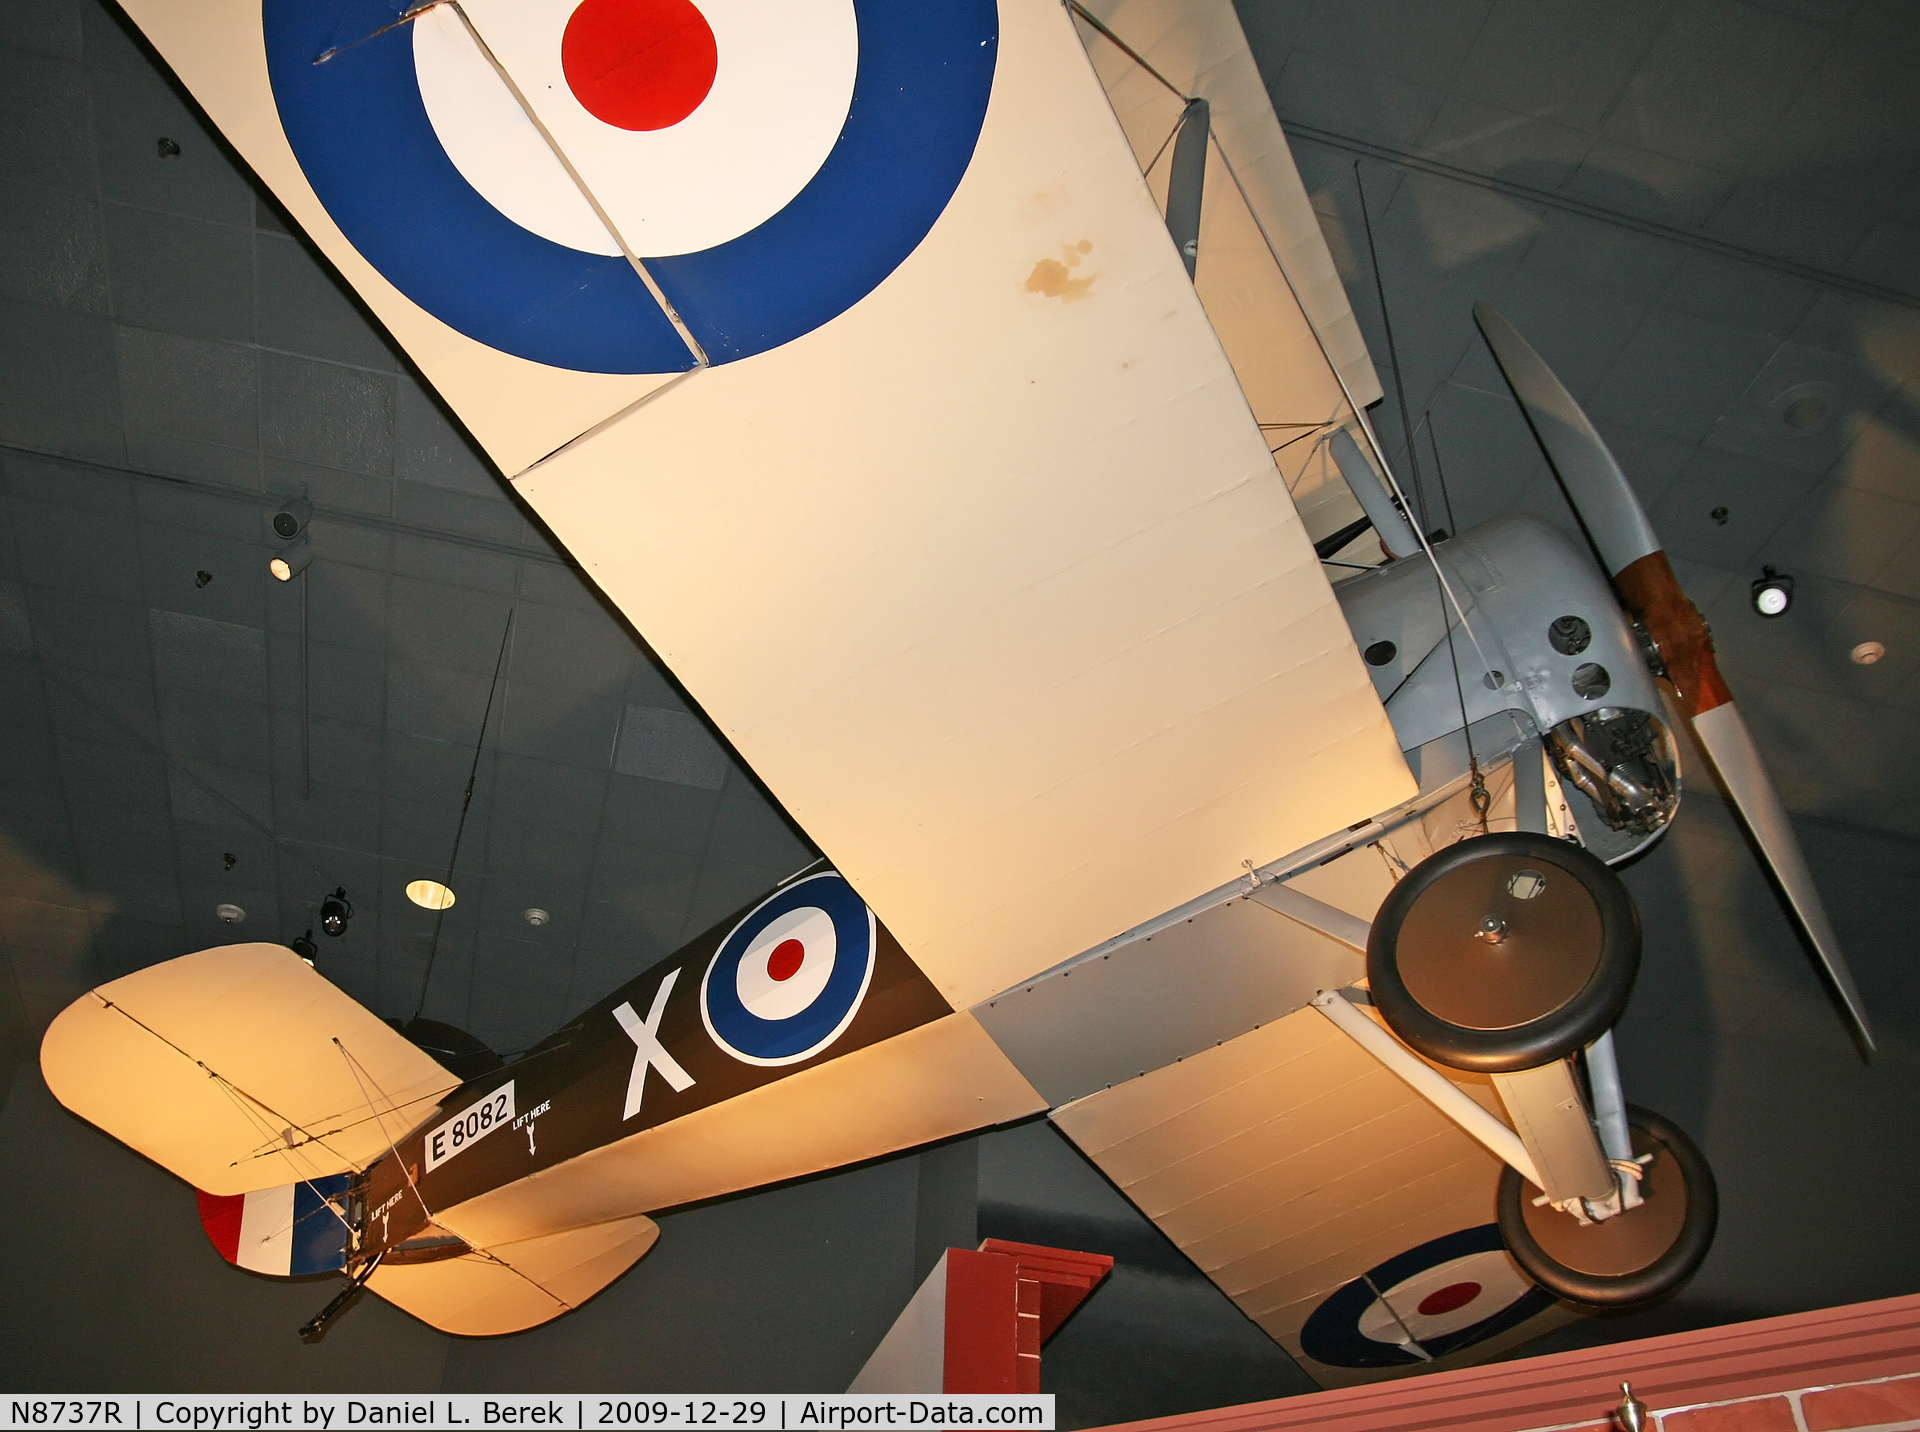 N8737R, 1963 Sopwith Snipe 7F1 Replica C/N 9262C, This genuine Sopwith Snipe was part of Cole Palen's original purchase of aircraft when he resided near Roosevelt Field, LI.  Cole Palen restored the aircraft and flew it at Old Rhinebeck Aerodrome for a number of years. Upon his death in 1993, he bequeste